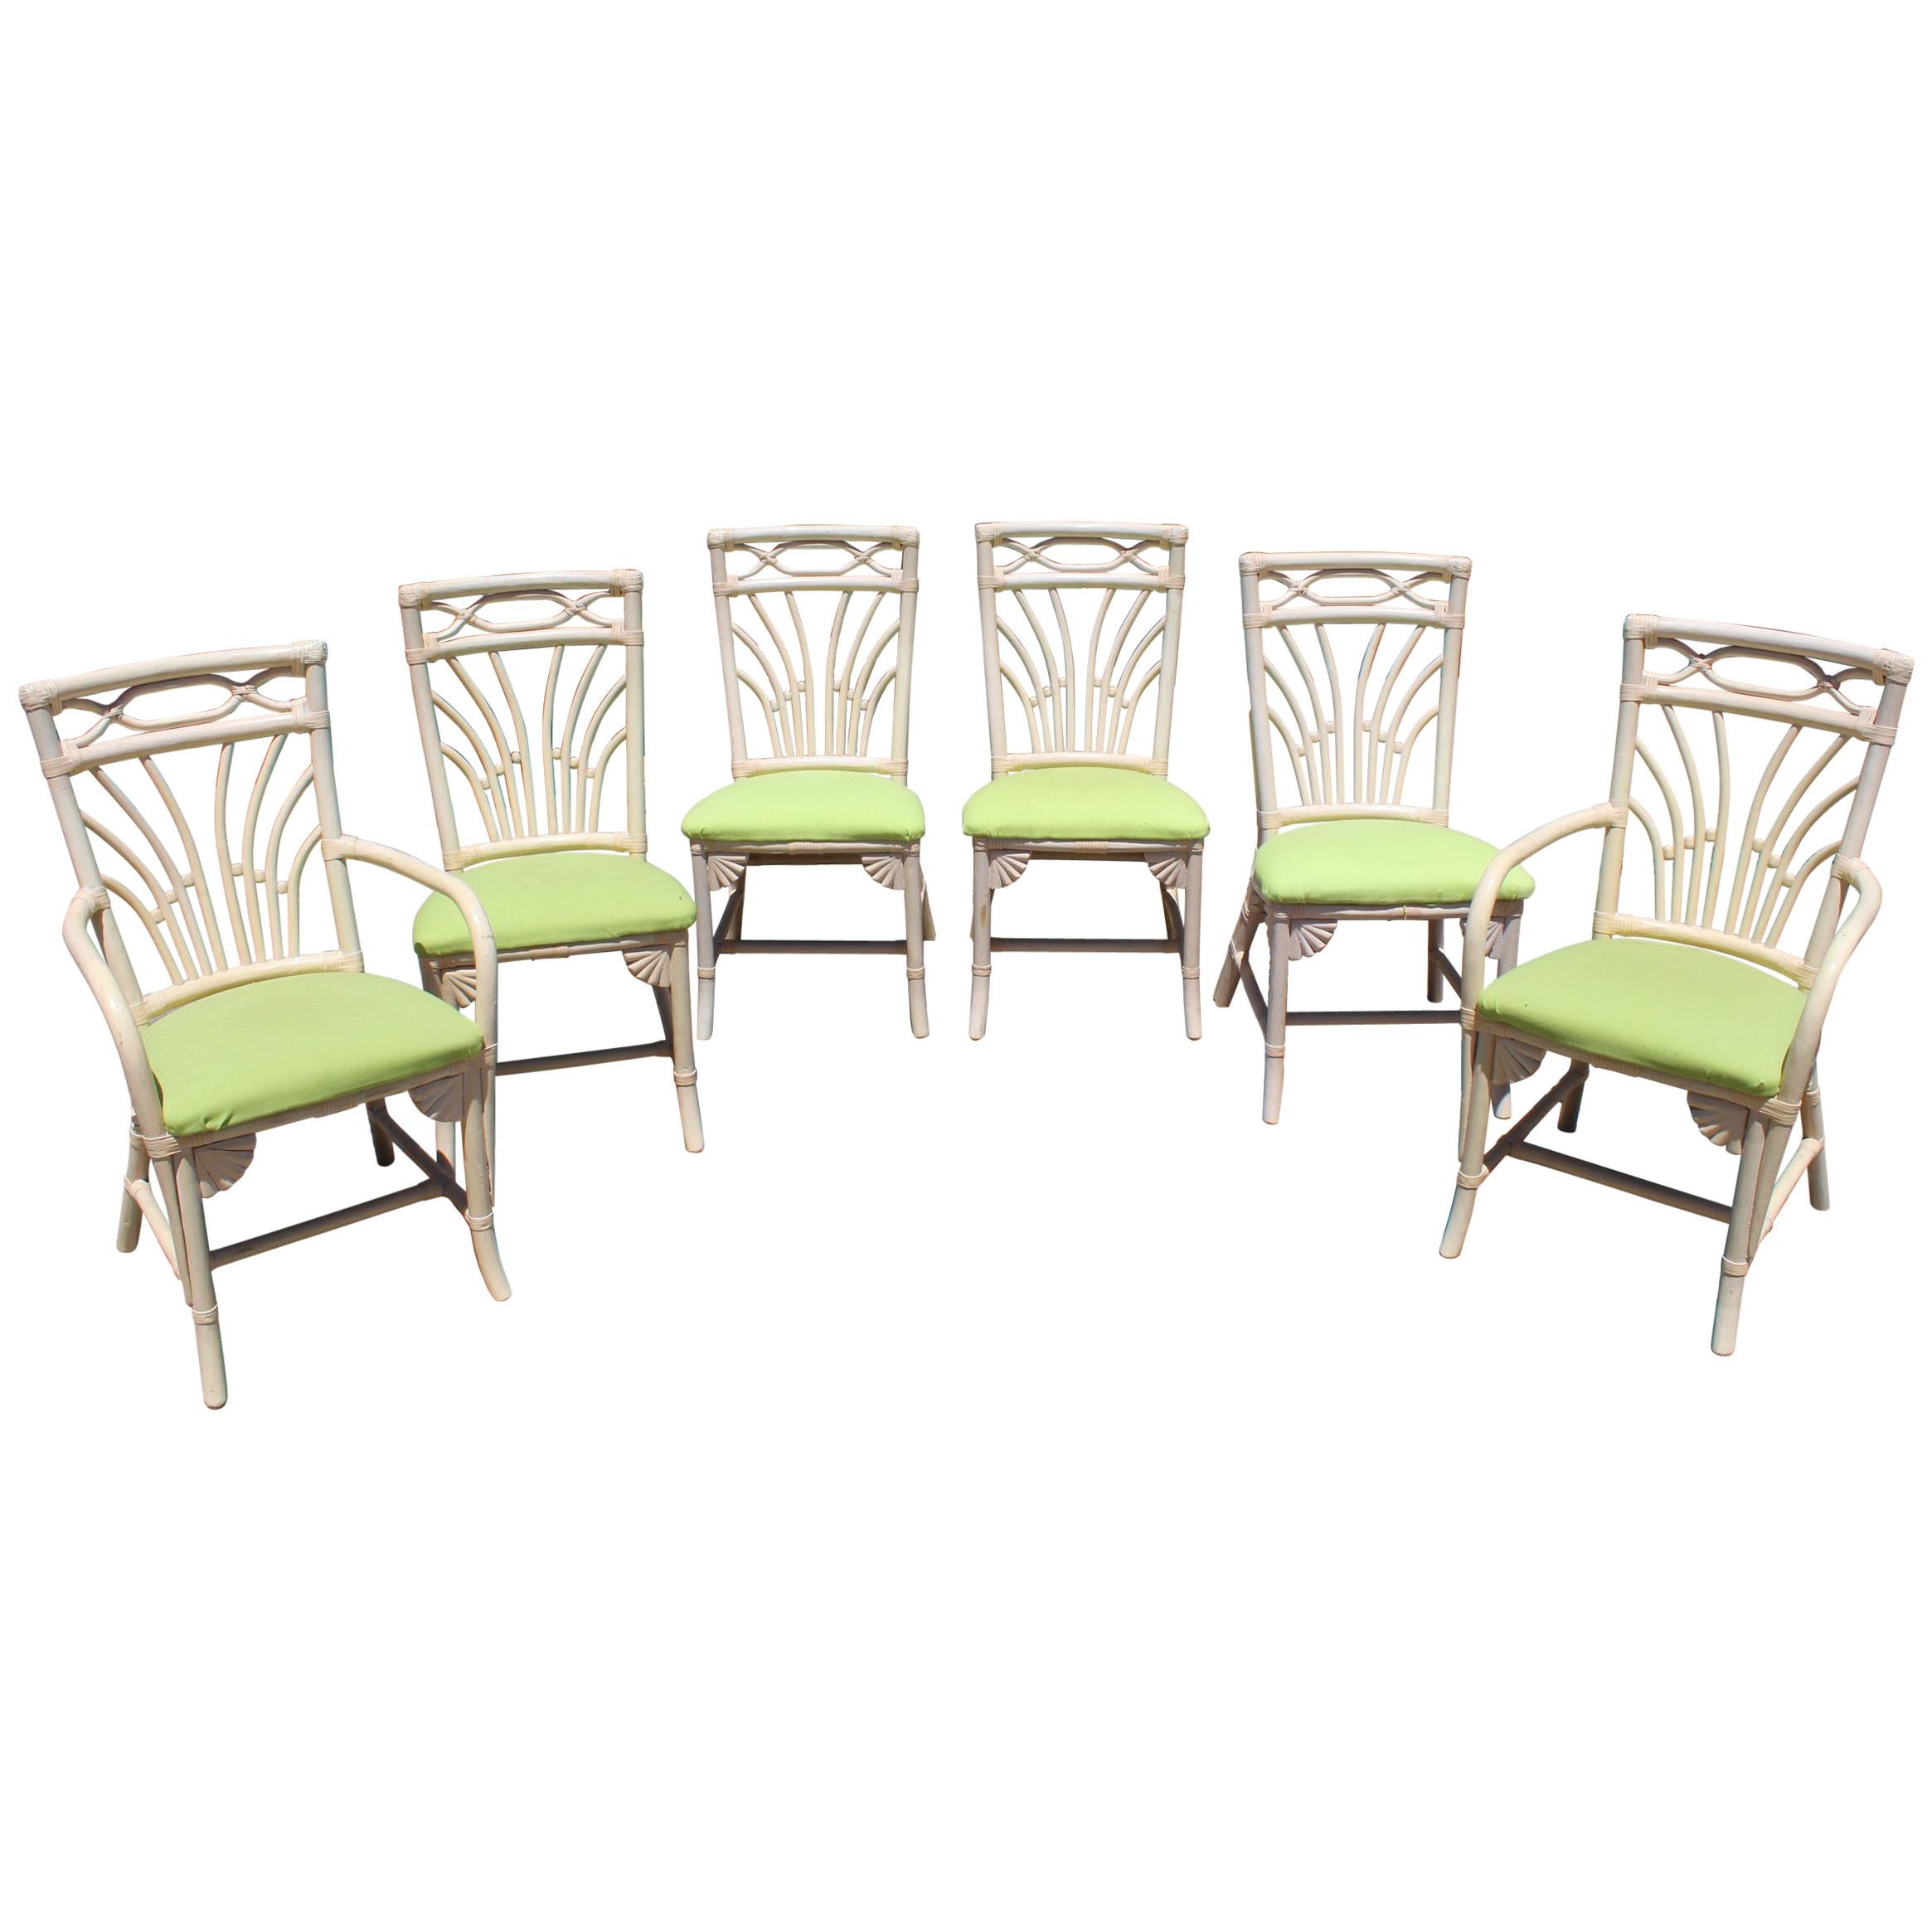 1980s Set of Six Bamboo Chairs with Leather Joints